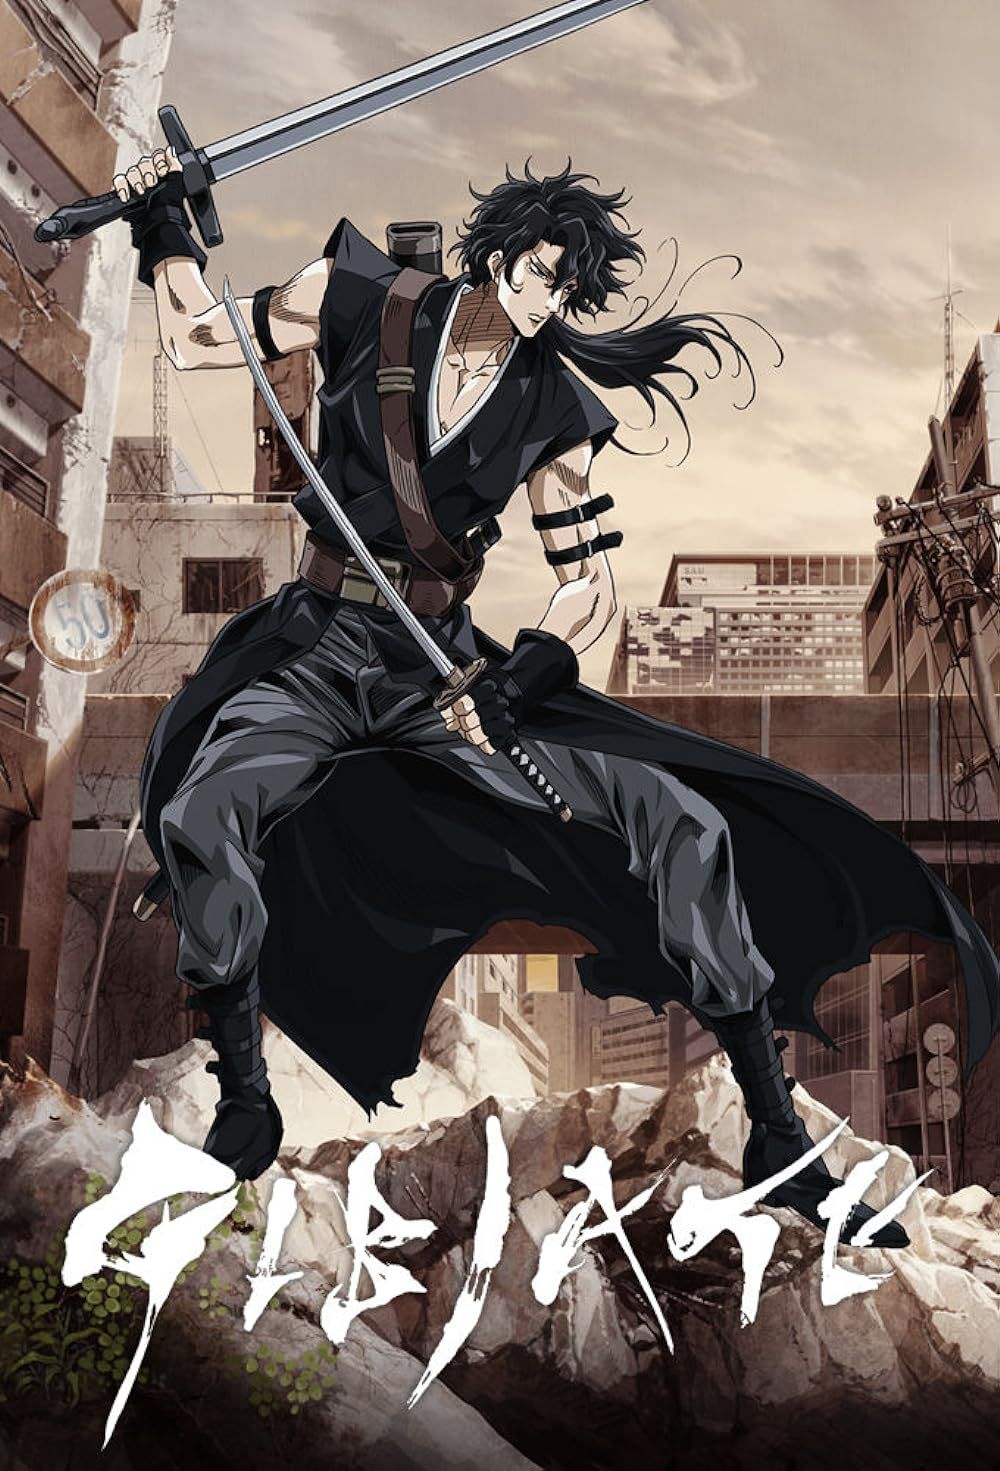 Gibiate anime poster with the main character jumping while wielding a katana